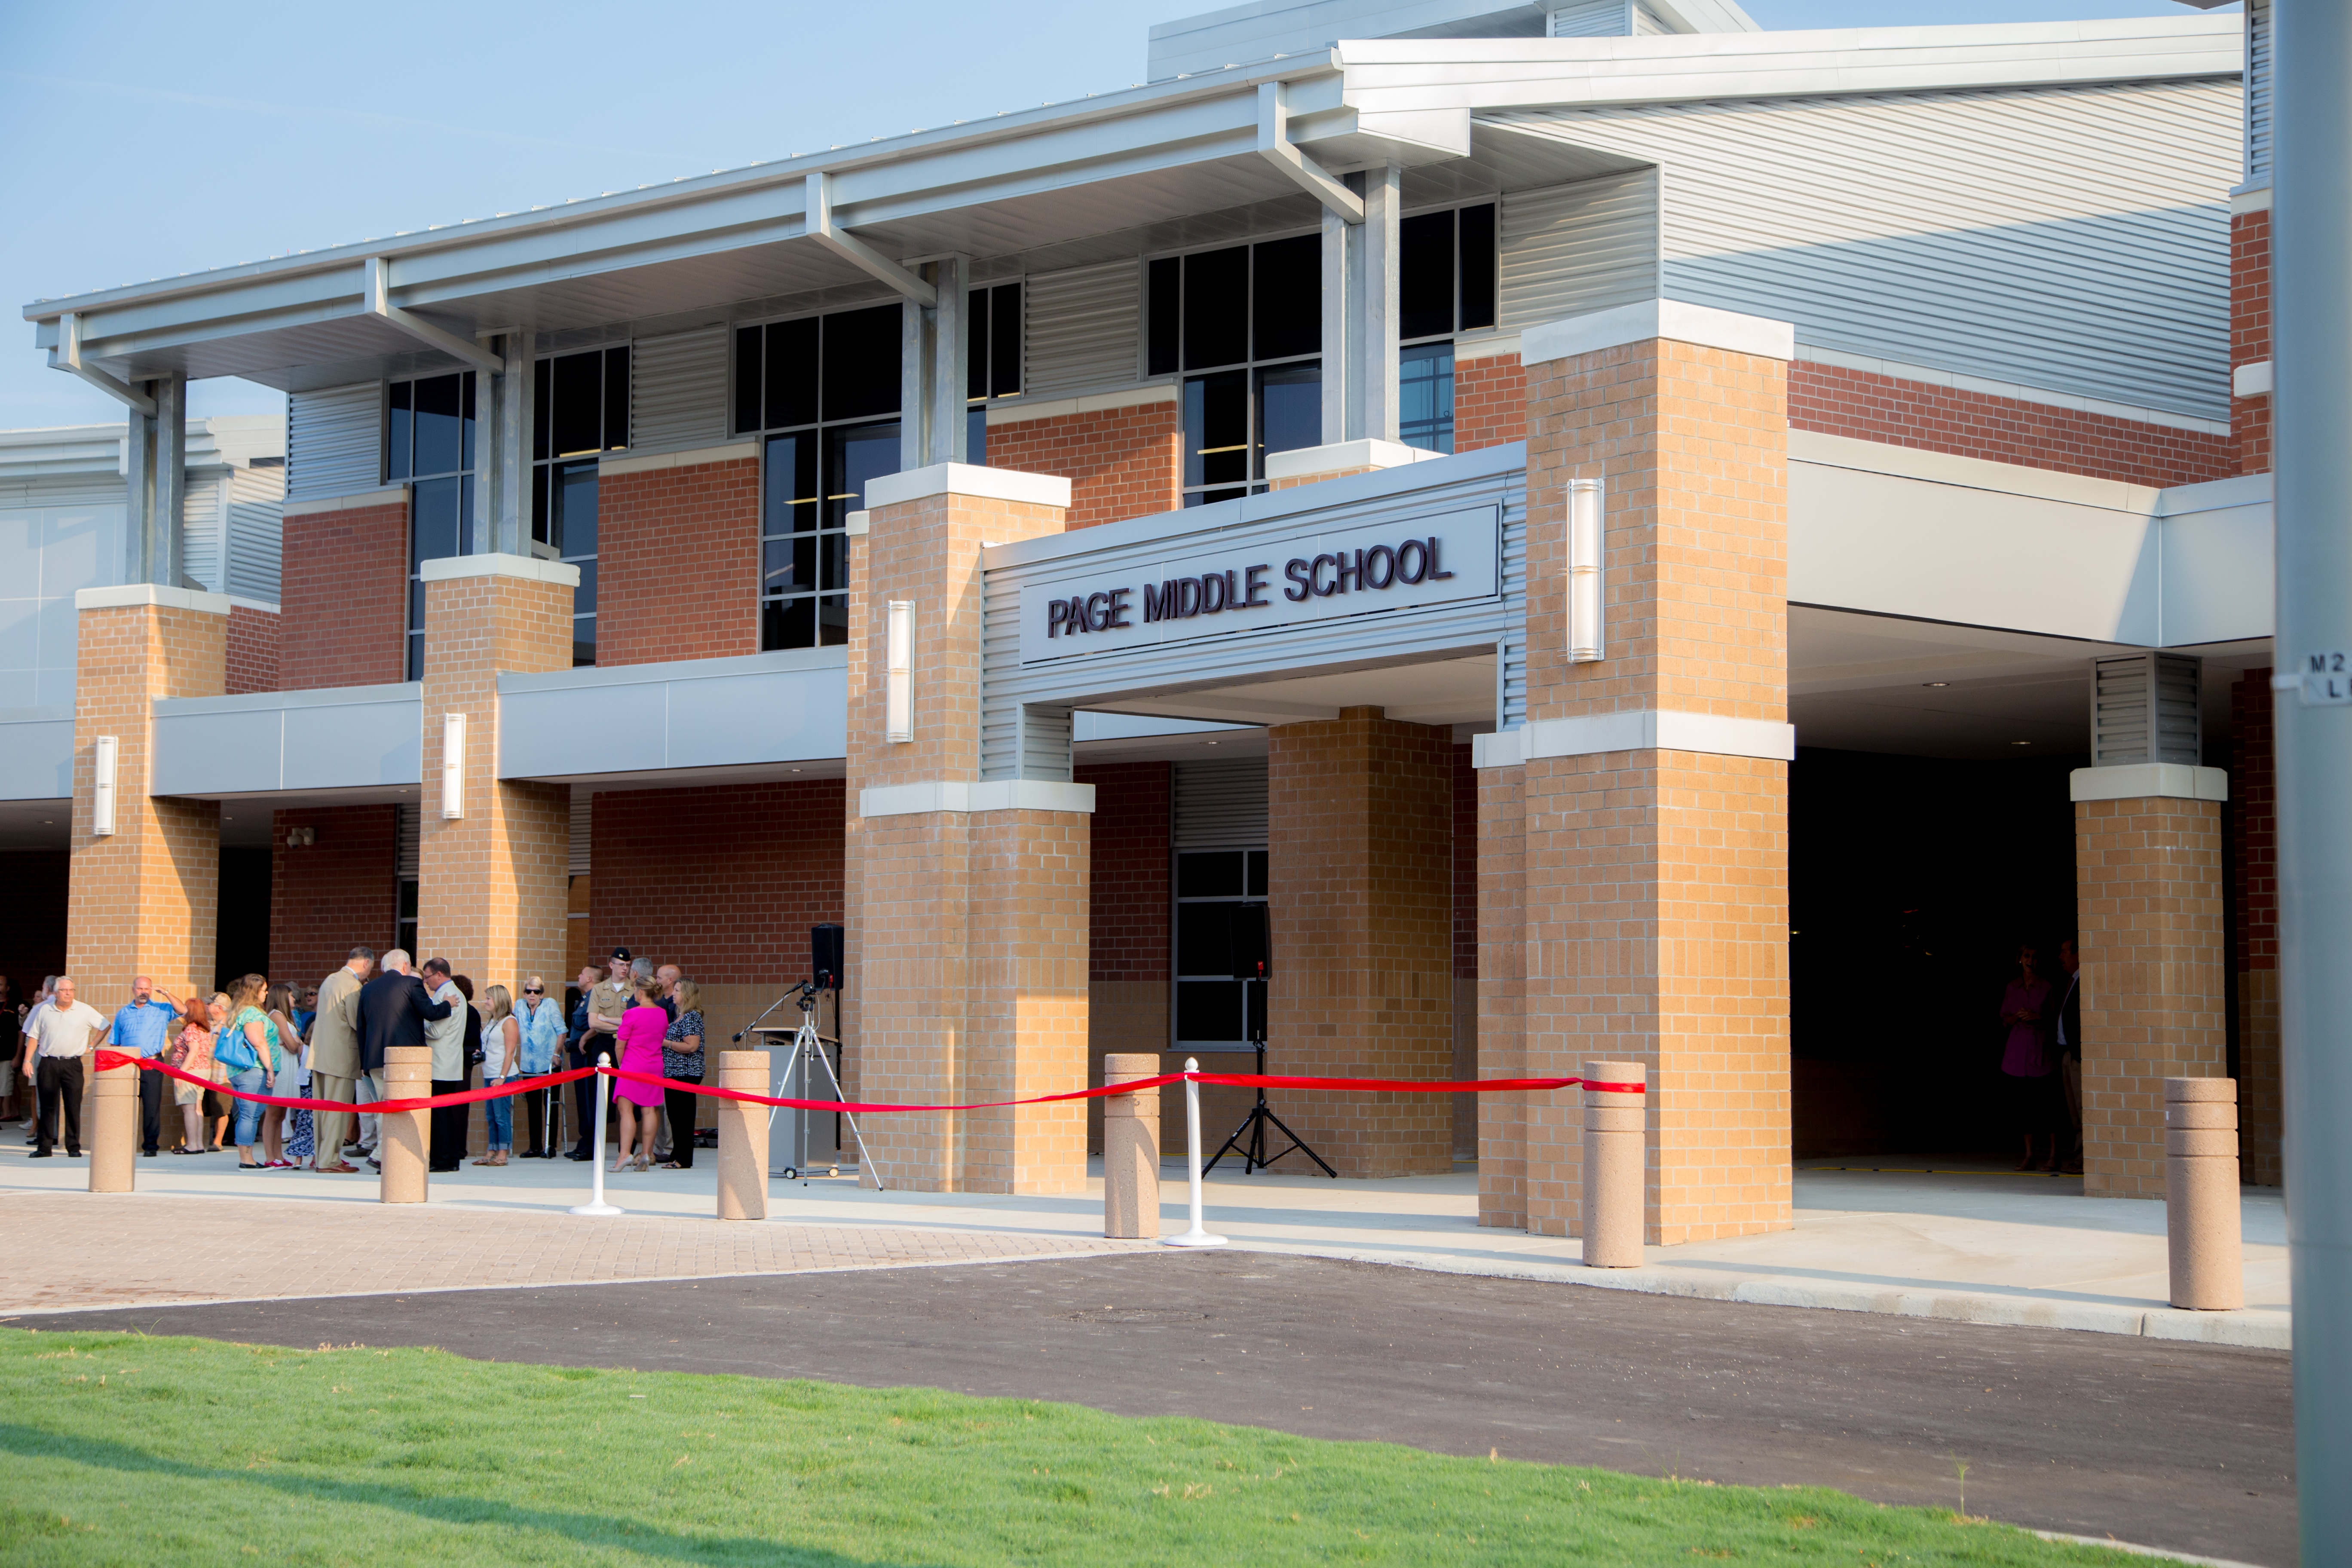 The new Page Middle School ribbon cutting ceremony was held on Friday, Sept. 4